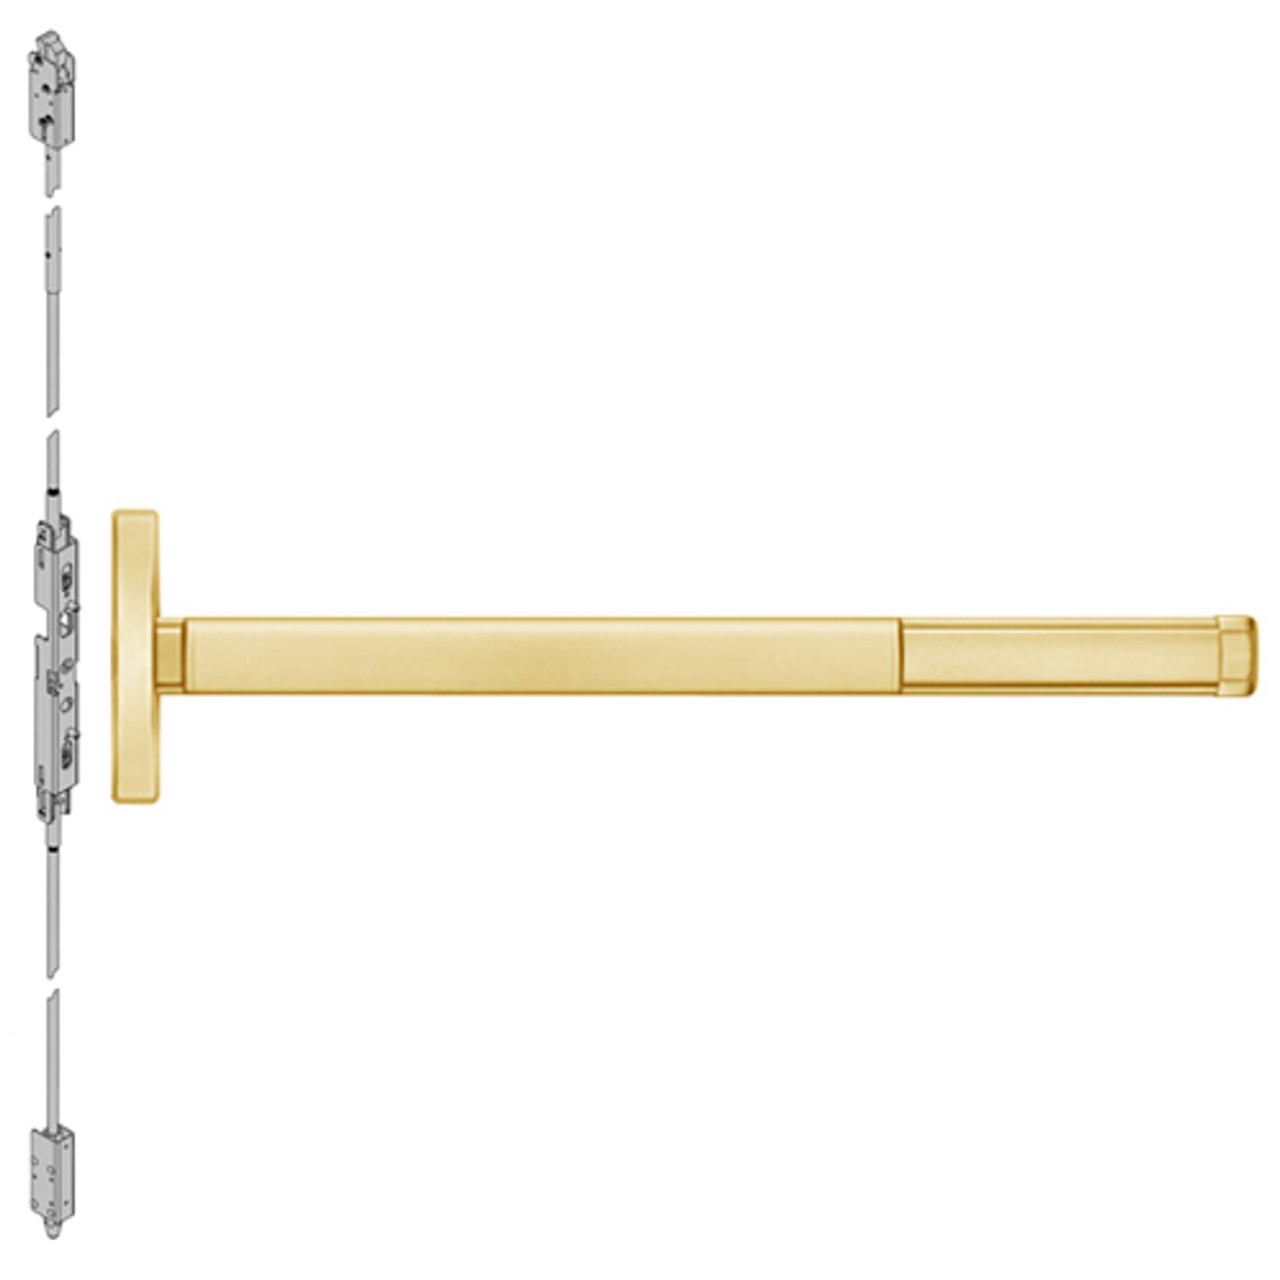 TS2608-605-48 PHI 2600 Series Concealed Vertical Rod Exit Device with Touchbar Monitoring Switch Prepped for Key Controls Lever in Bright Brass Finish